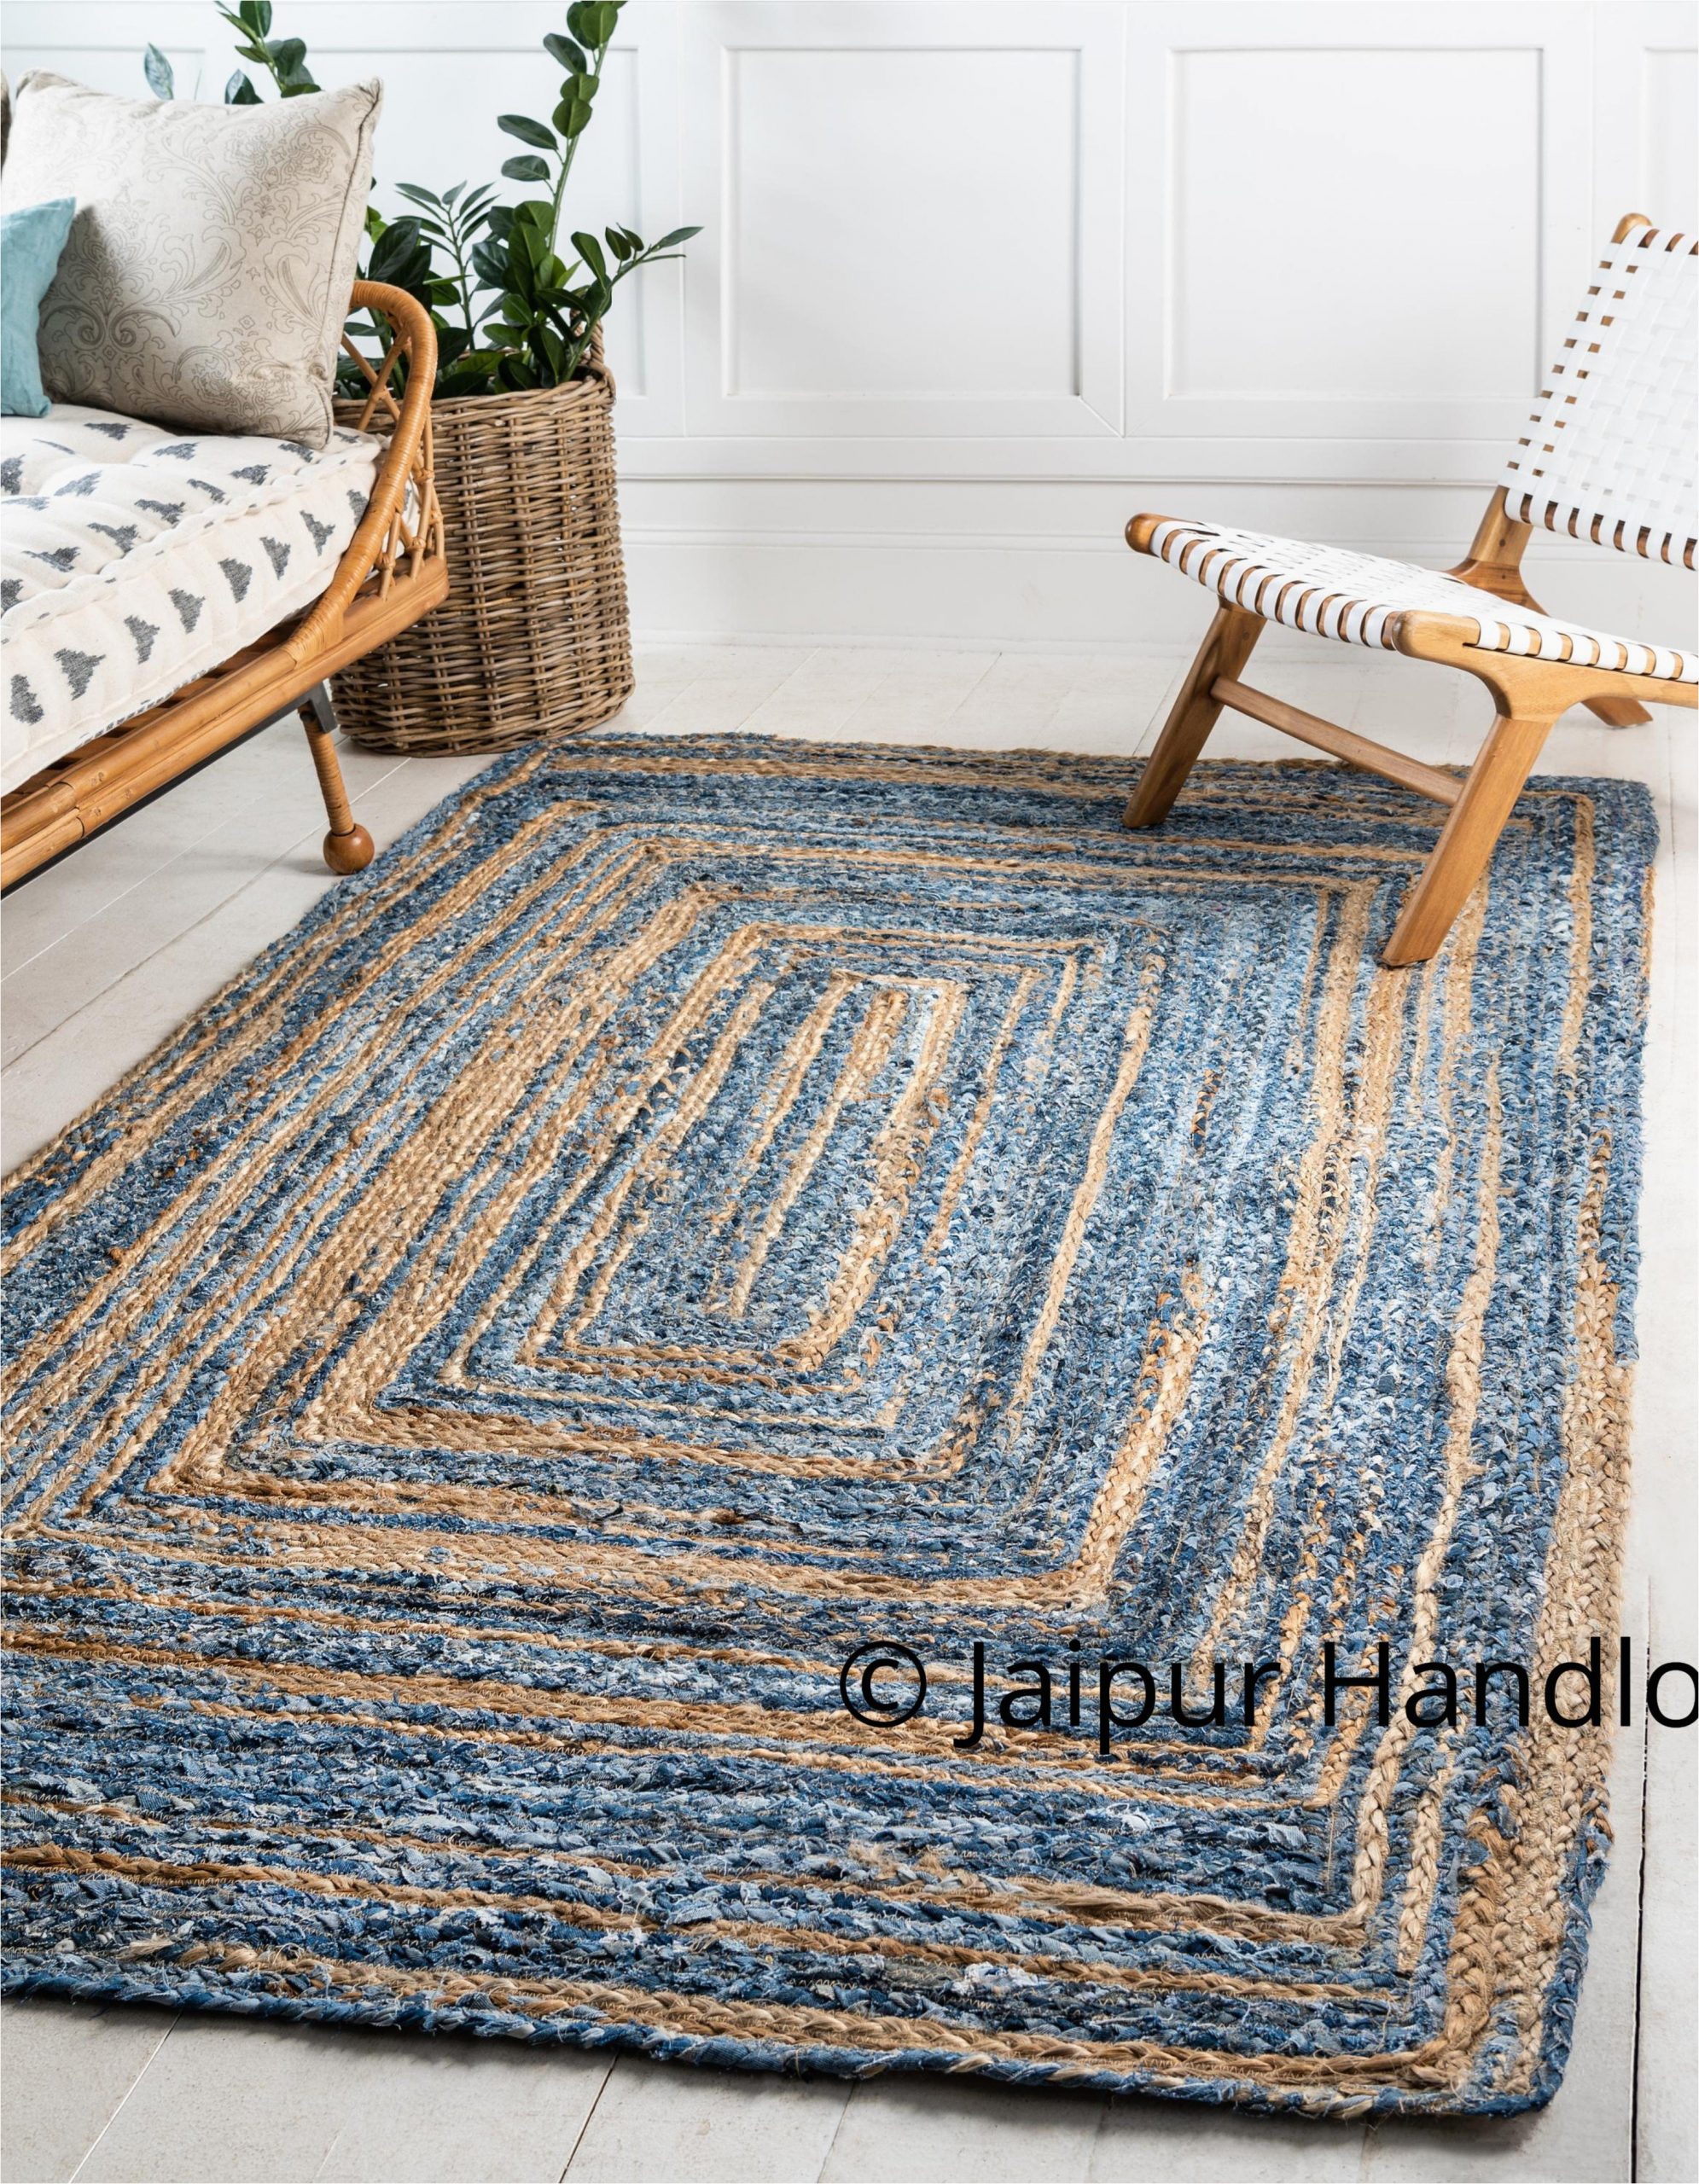 Blue Jute area Rug Indian Casual Handmade Braided Blue Color Denim and Jute area Rugs 4×6 Ft